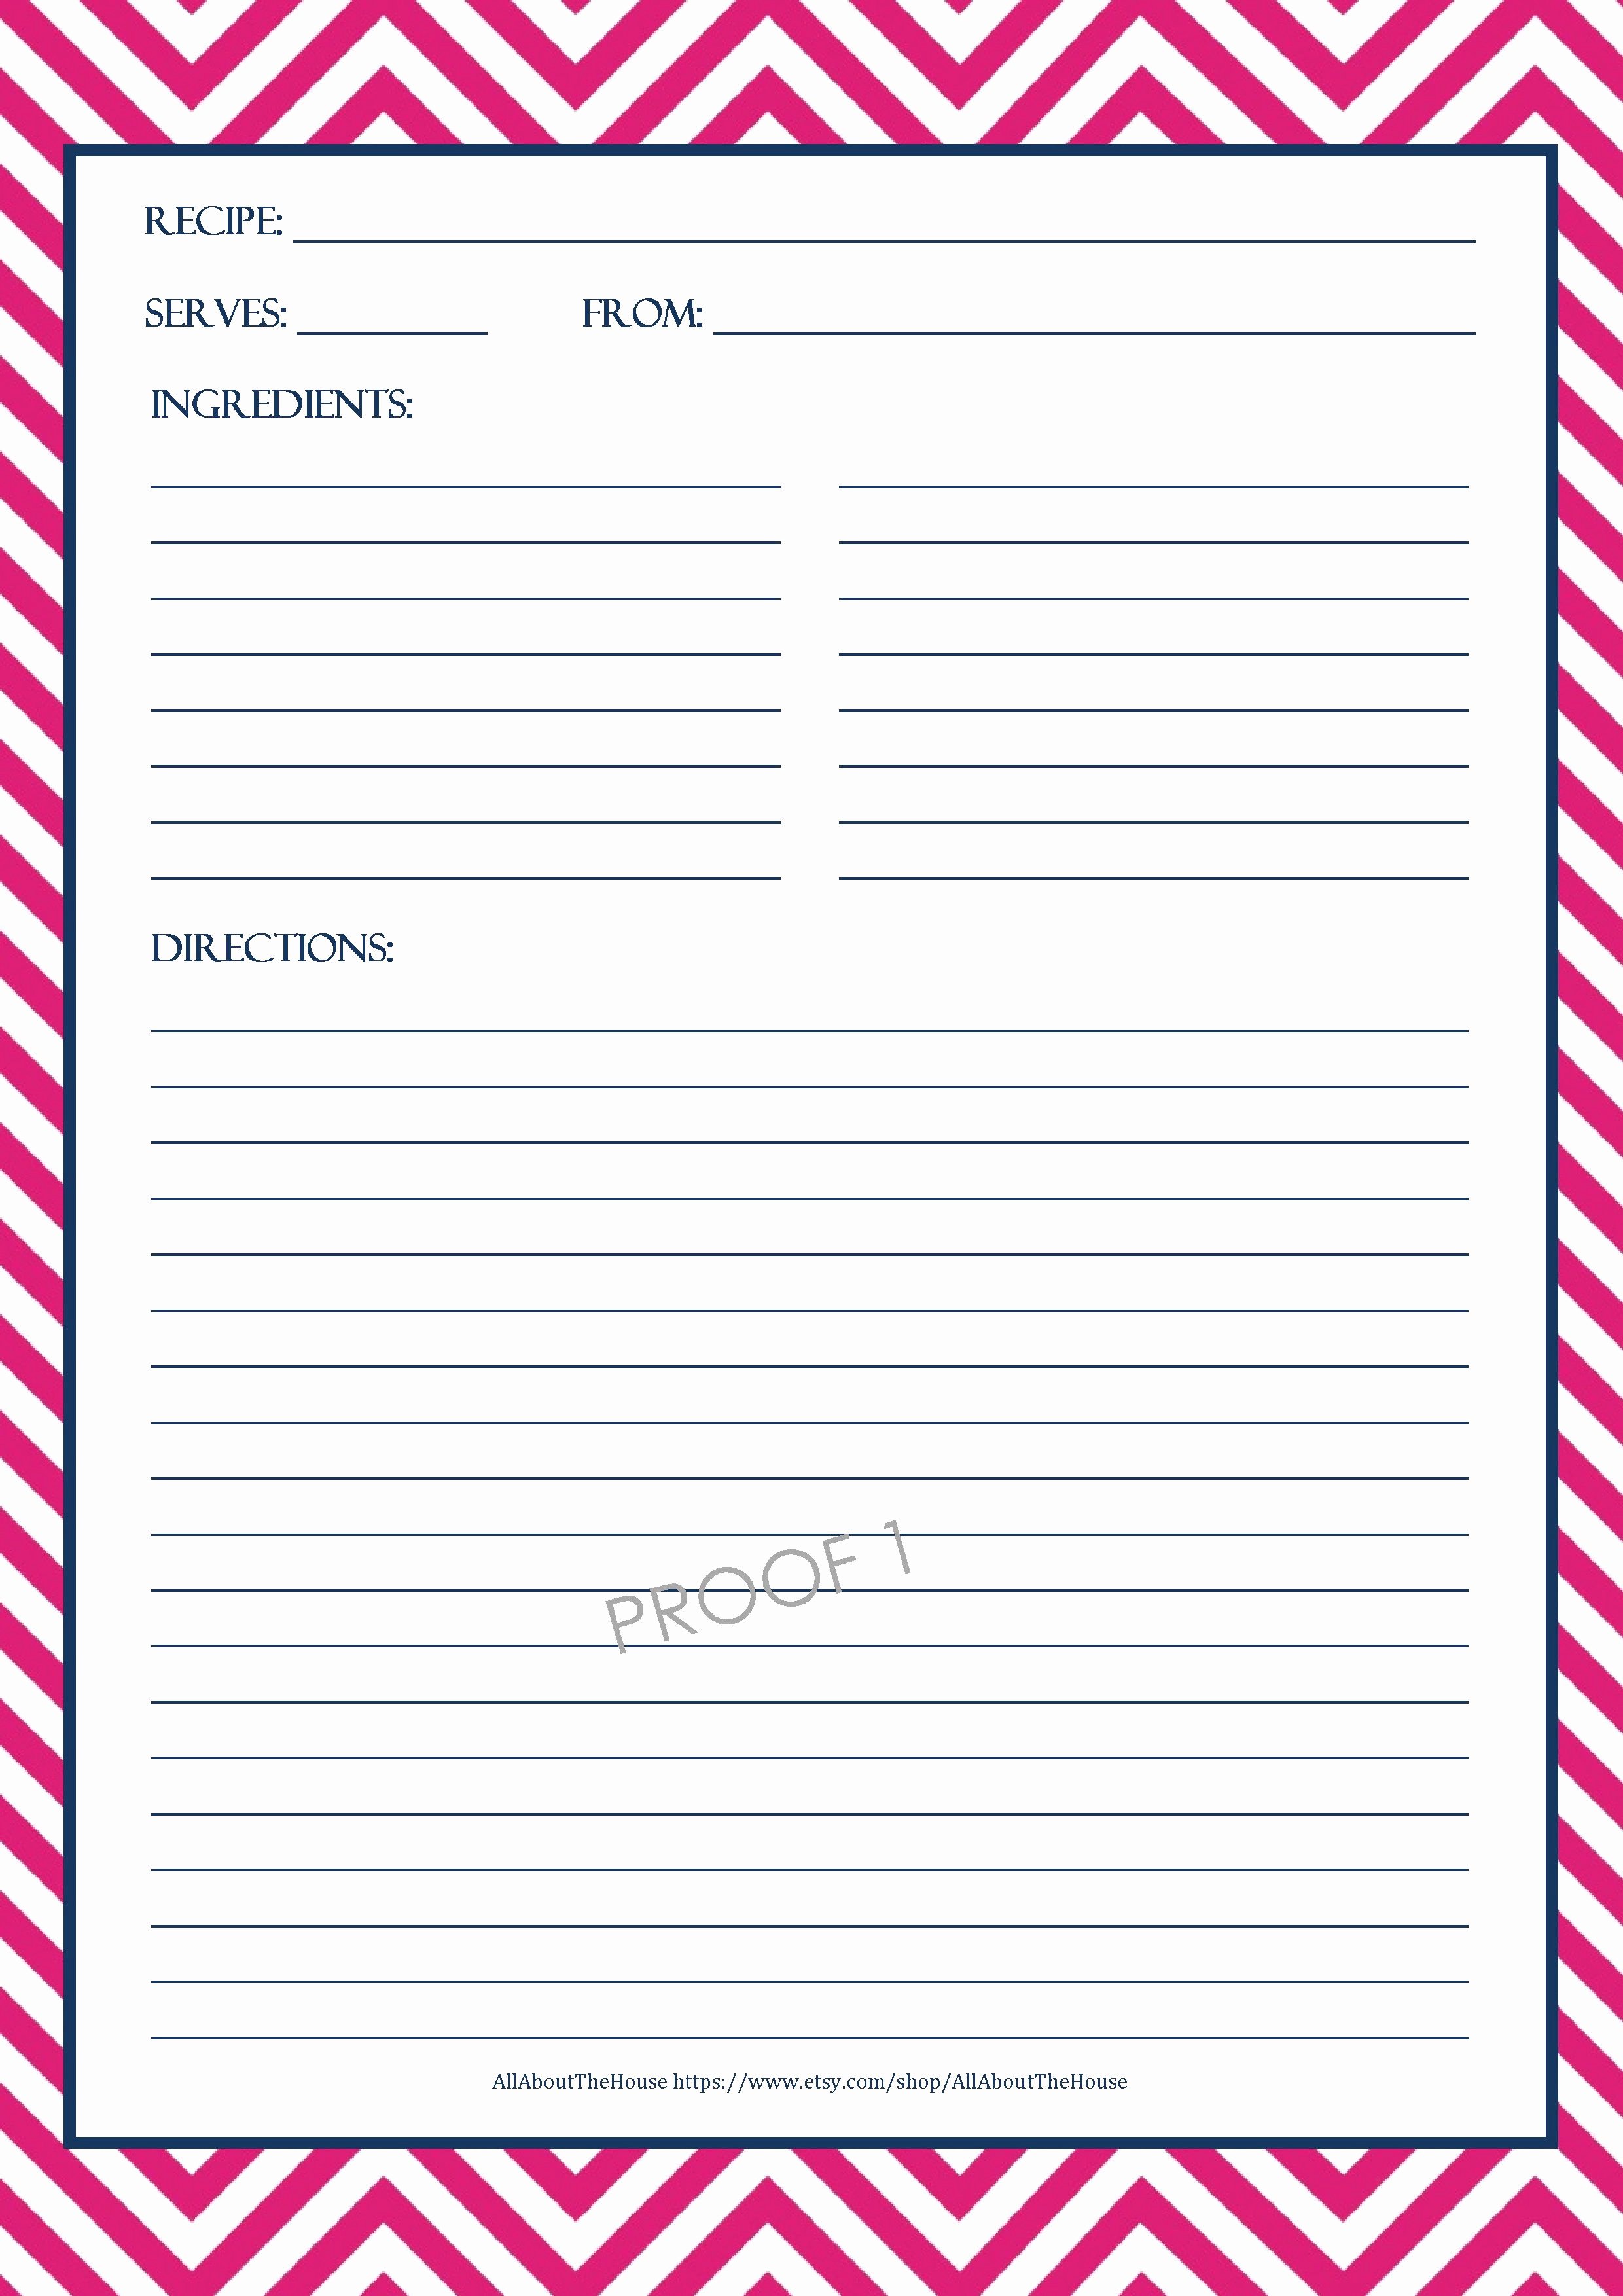 Free Editable Recipe Card Templates for Microsoft Word Awesome Full Page Recipe Creative Templates Google Search